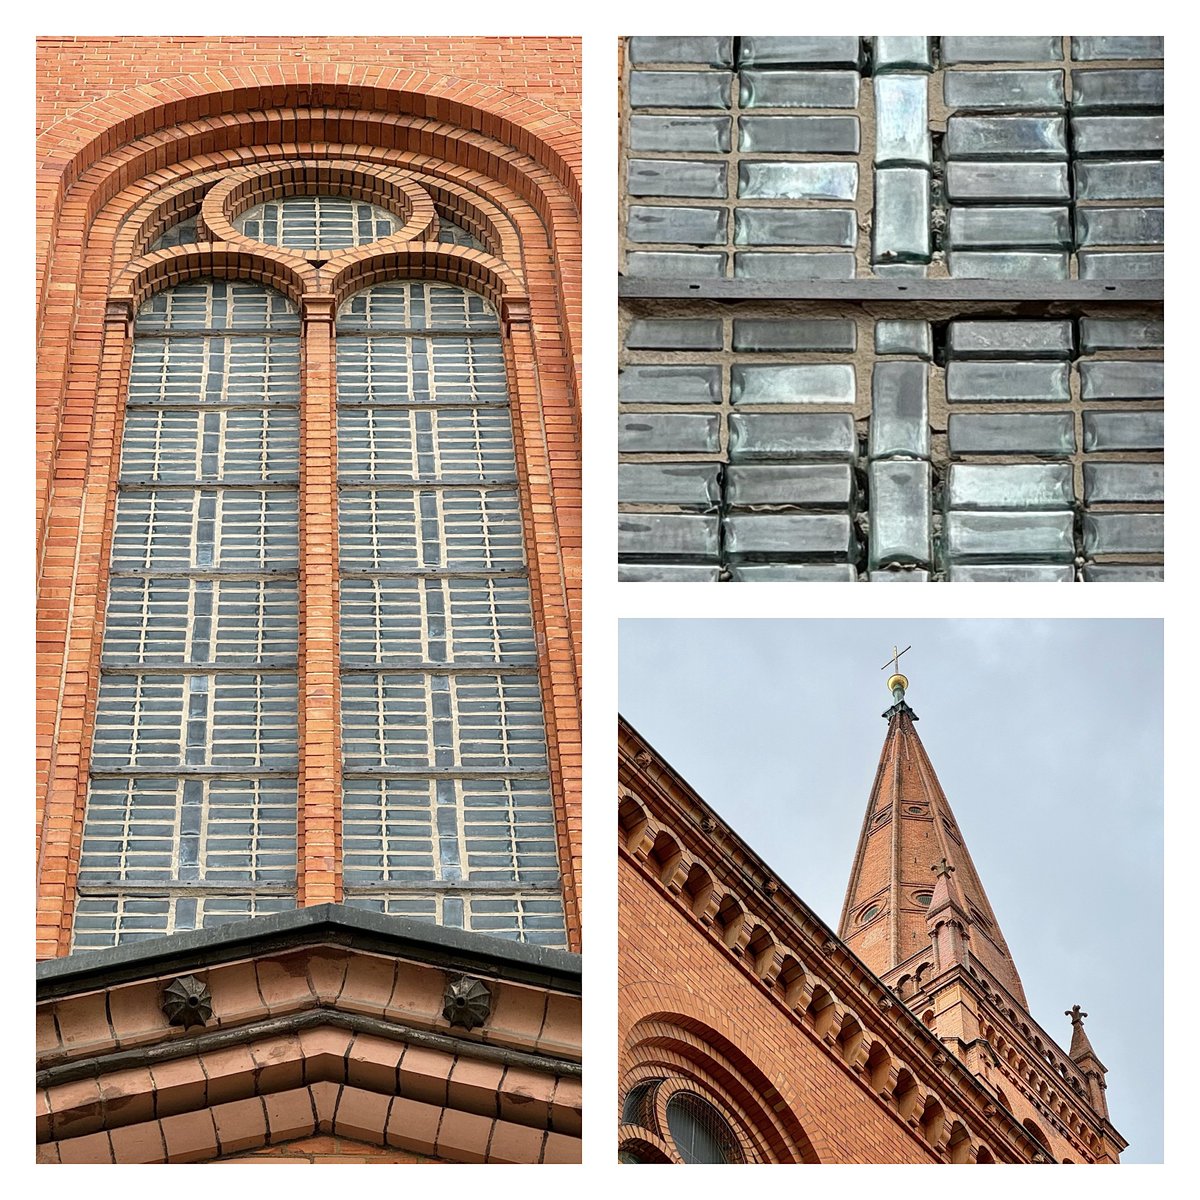 Even an agnostic cannot deny the Holy Spirit: Shortly after WW2 the windows of the Church of the Twelve Apostles at the southern end of Genthiner Str. (Berlin-Charlottenburg) were repaired by using rectangular gin bottles from a nearby factory! Some of these windows still exist.